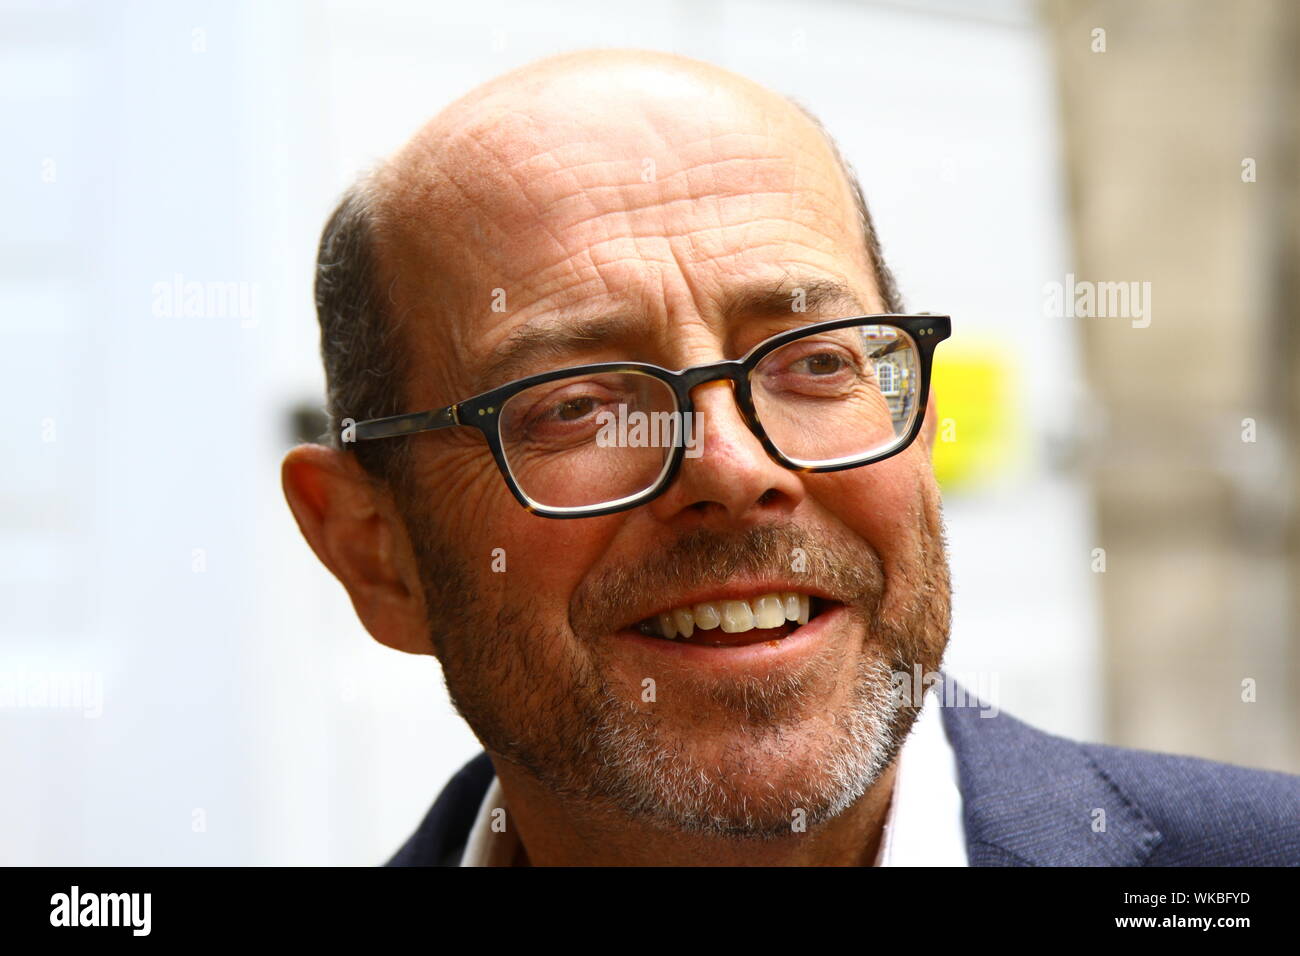 NICK ROBINSON AT COLEGE GREEN , WESTMINSTER ON 3RD SEPTEMBER 2019. BRITISH JOURNALISTS. BROADCASTERS. BBC RADIO 4. BBC EDITORS. BBC POLITICAL EDITORS. CORRESPONDENTS. RADIO BROADCASTERS. RADIO PRESENTERS. Stock Photo